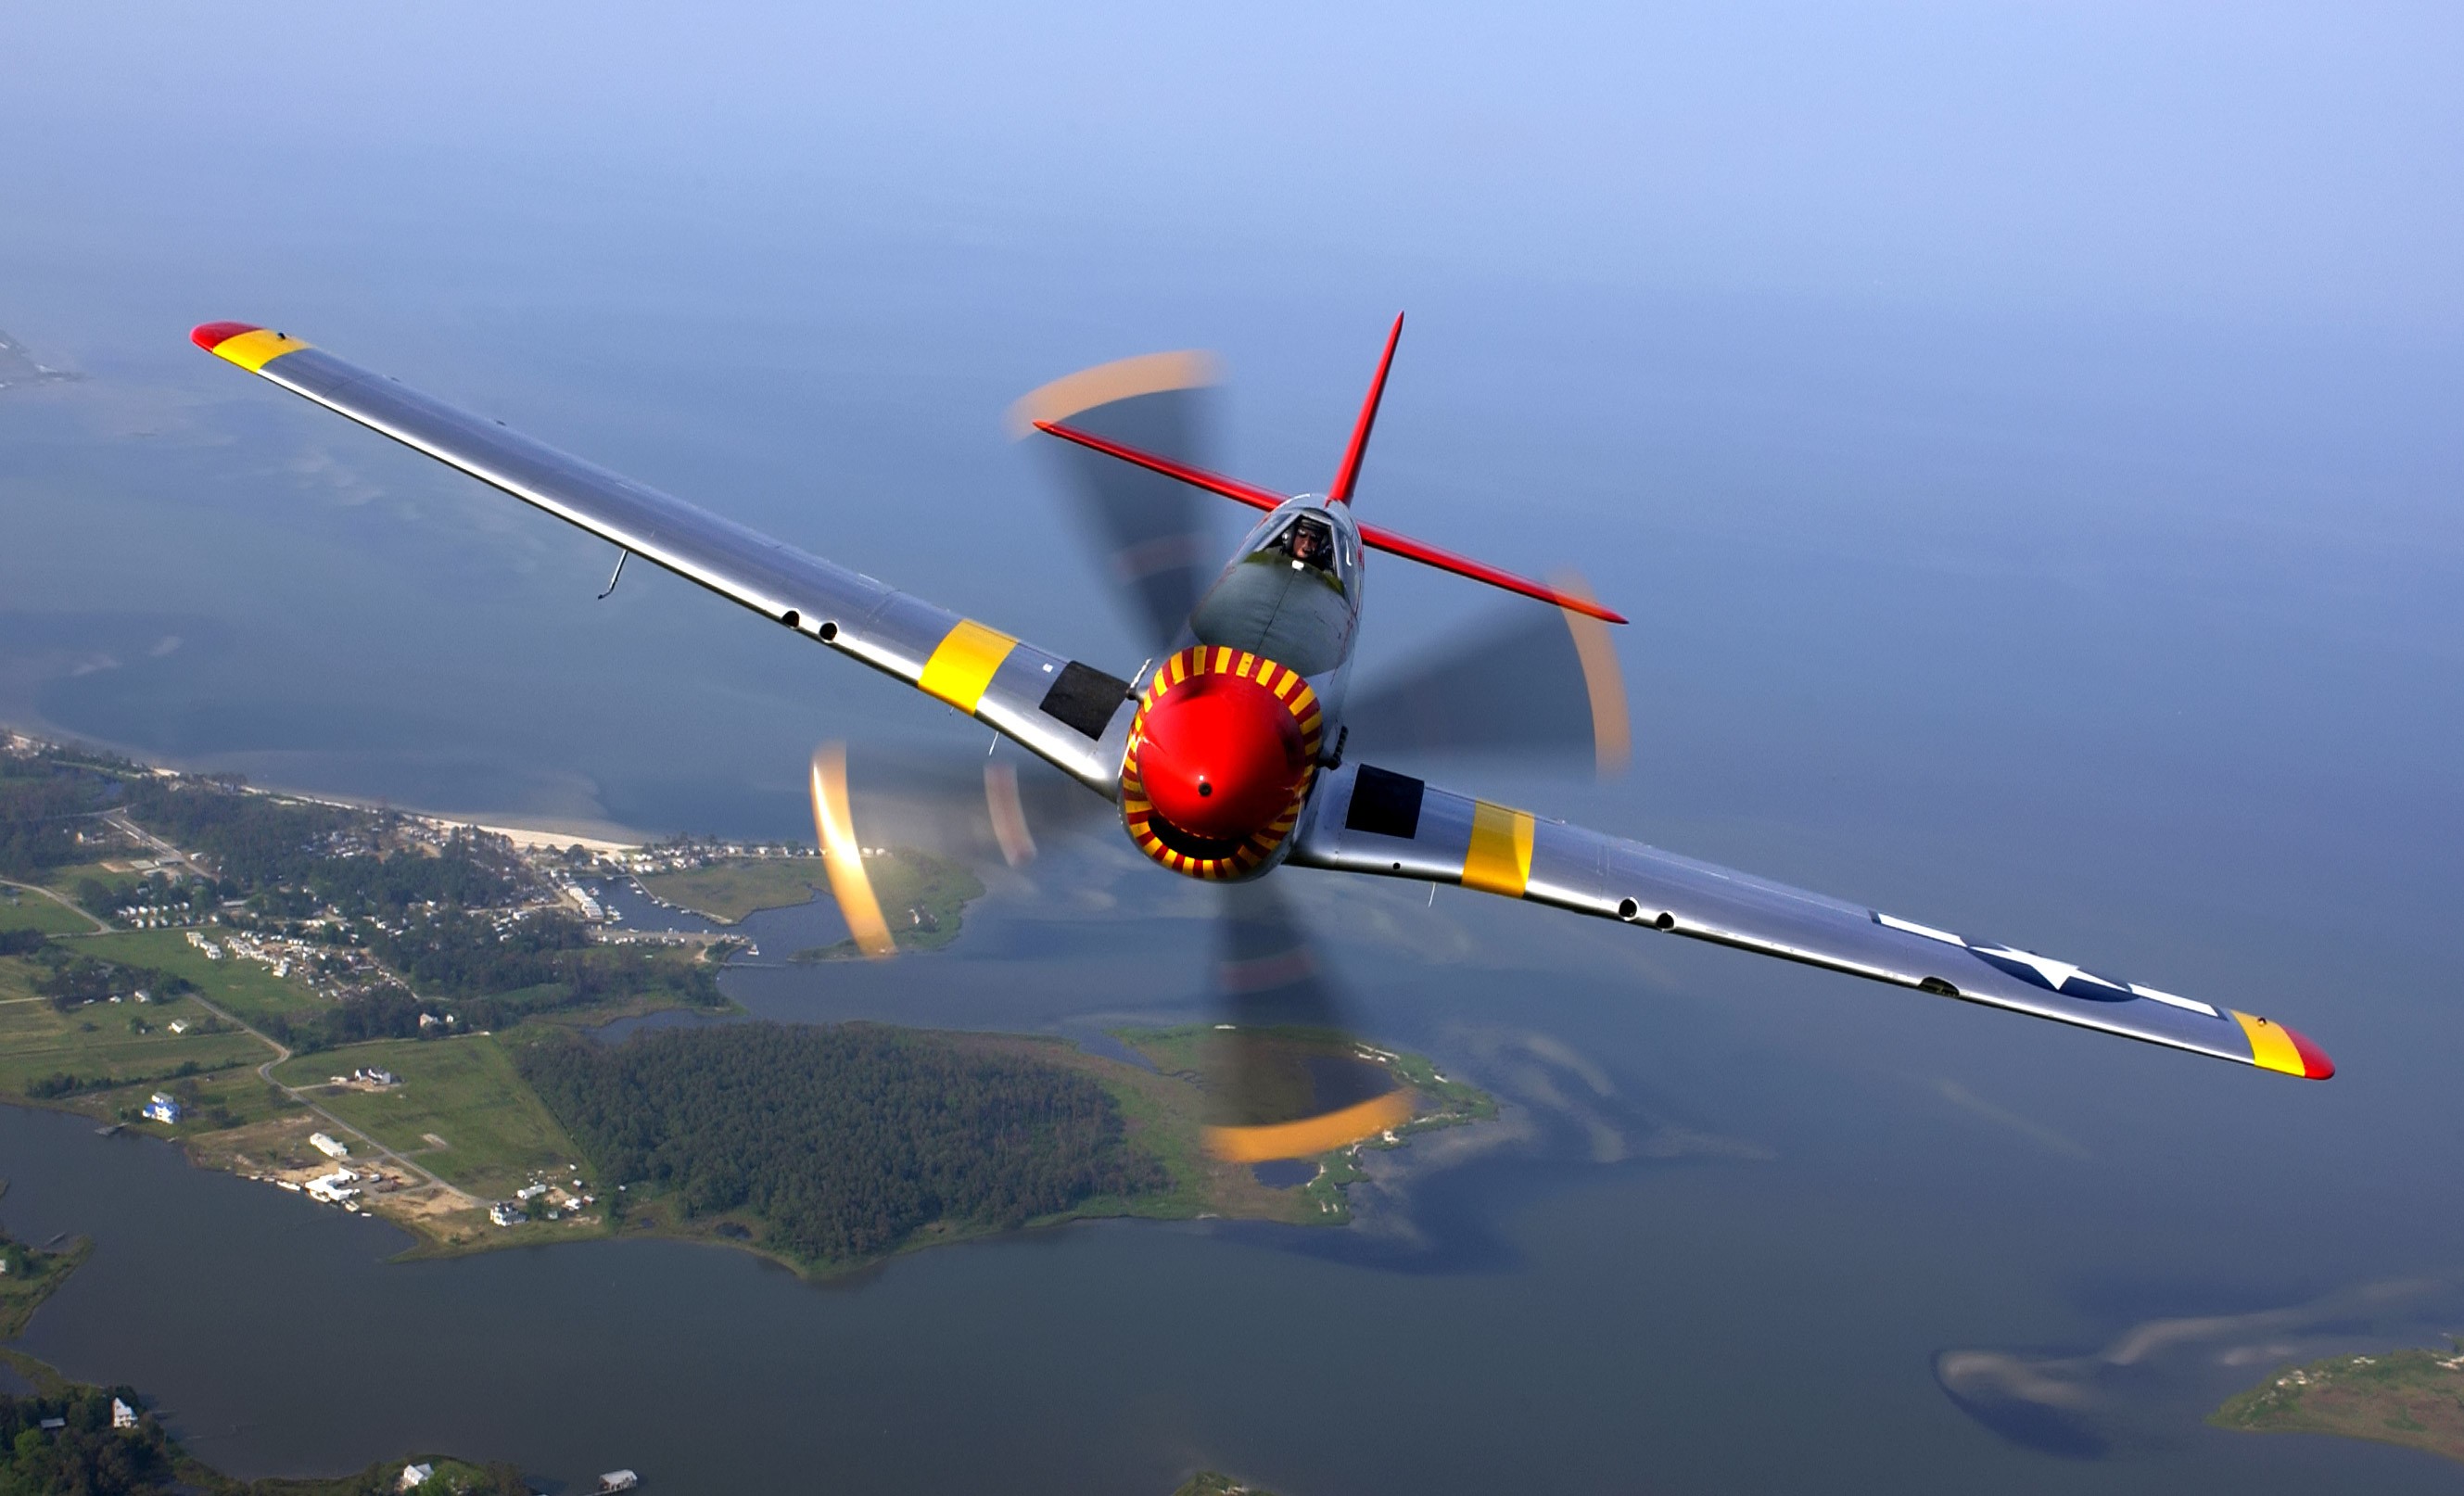 General 2658x1614 aerial view airplane men pilot face helmet wings flying motion blur Aviator North American P-51 Mustang American aircraft military aircraft landscape water frontal view sky